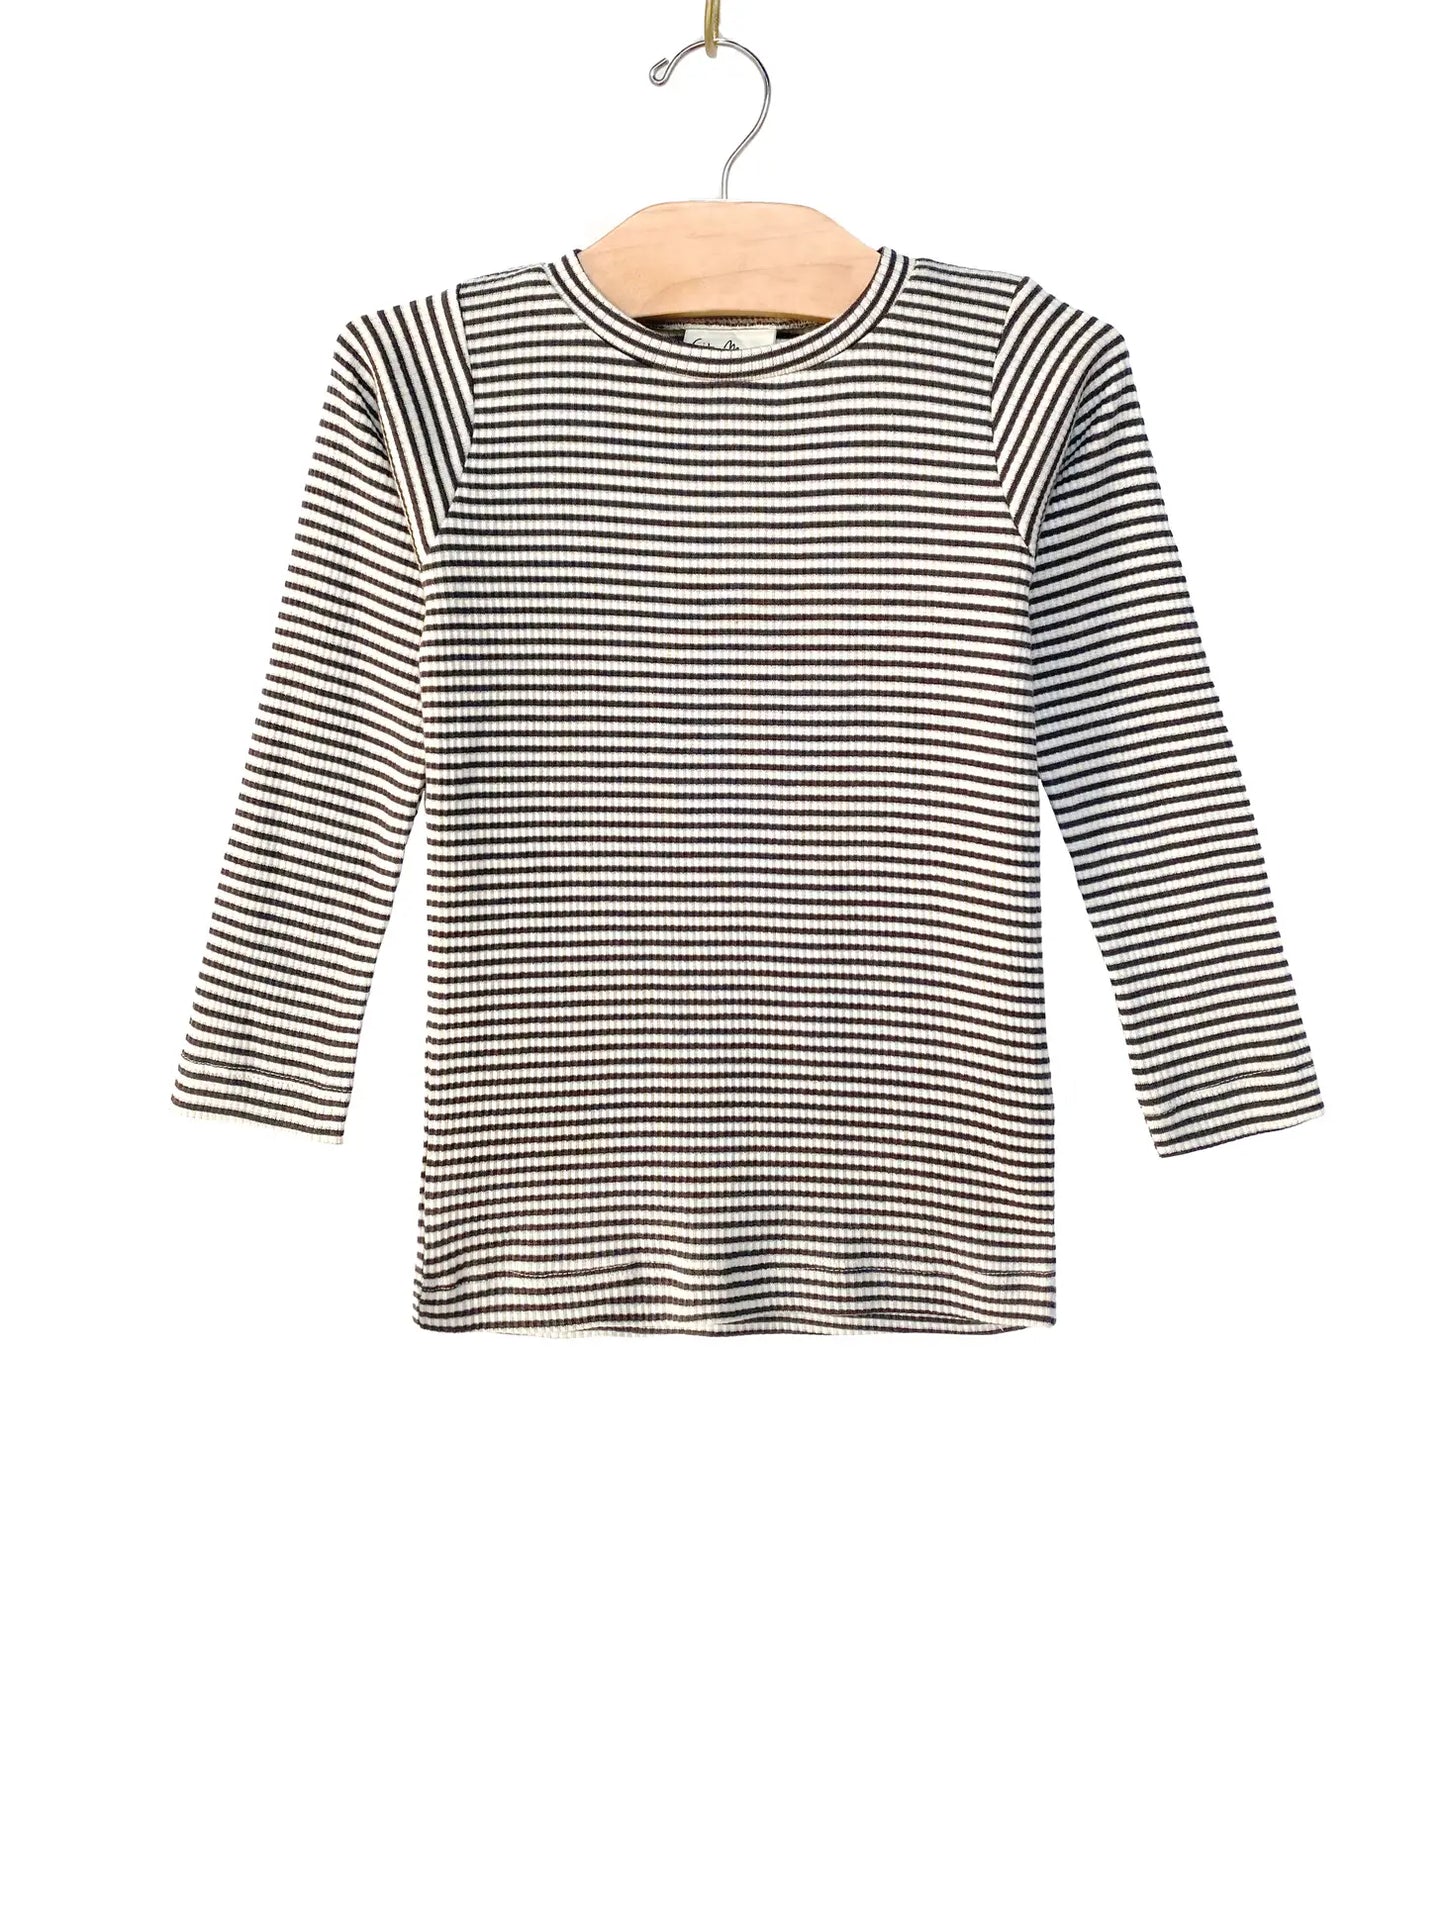 City Mouse® Basic Tee- Natural Stripe